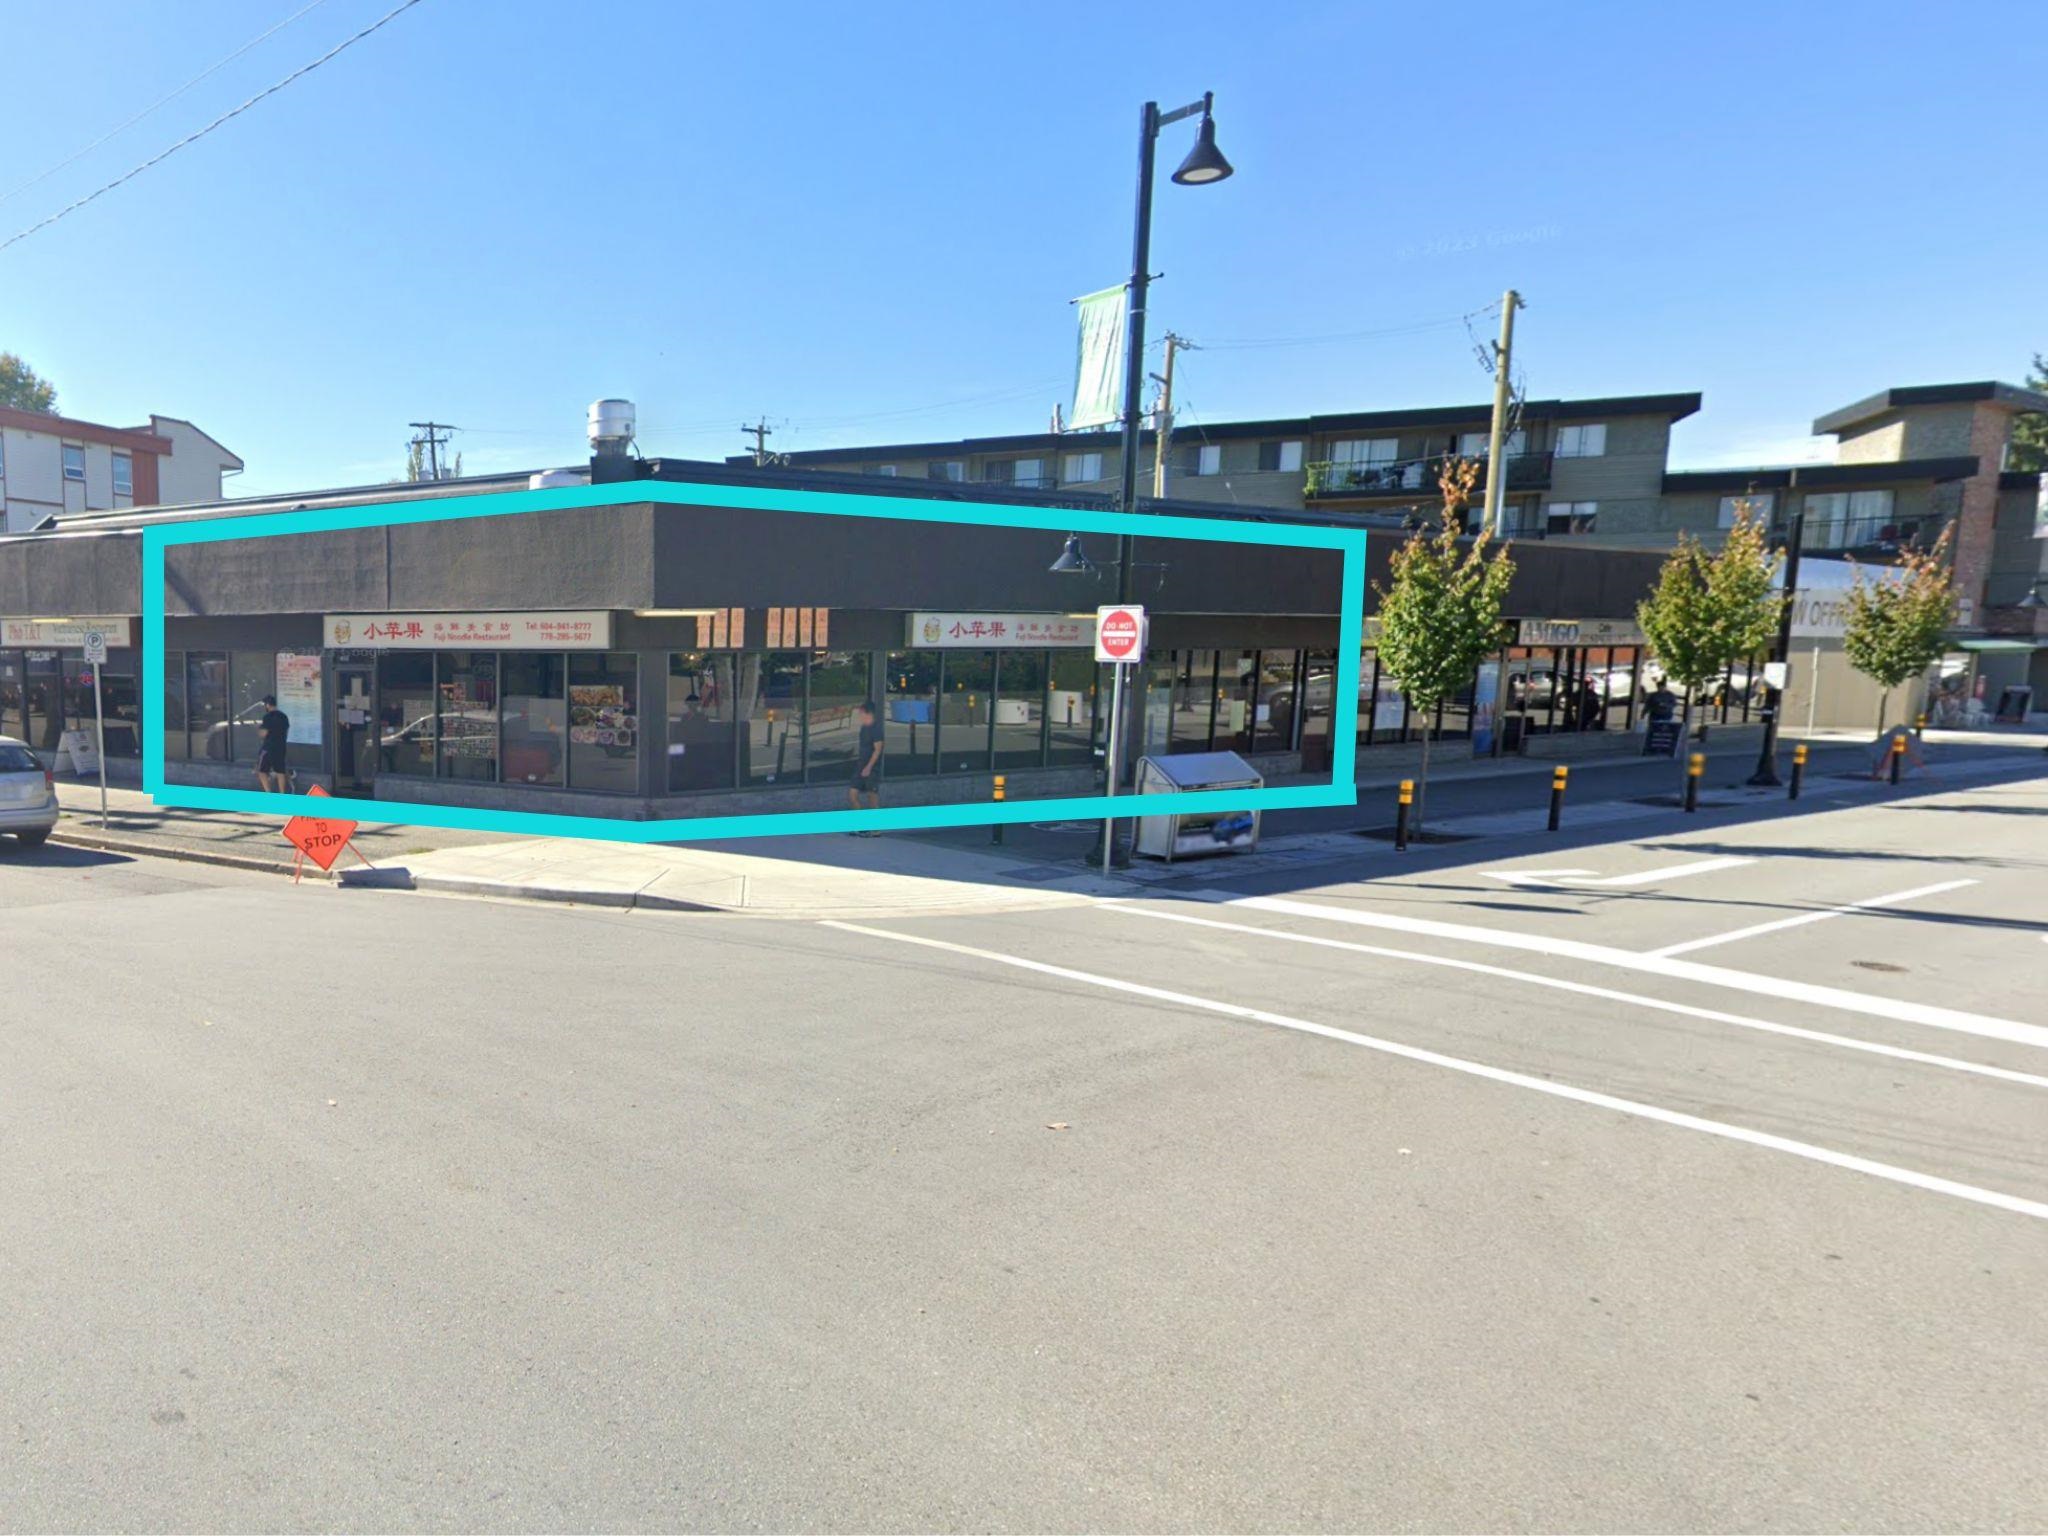 Central Pt Coquitlam Land Commercial for sale:    (Listed 6800-05-03)